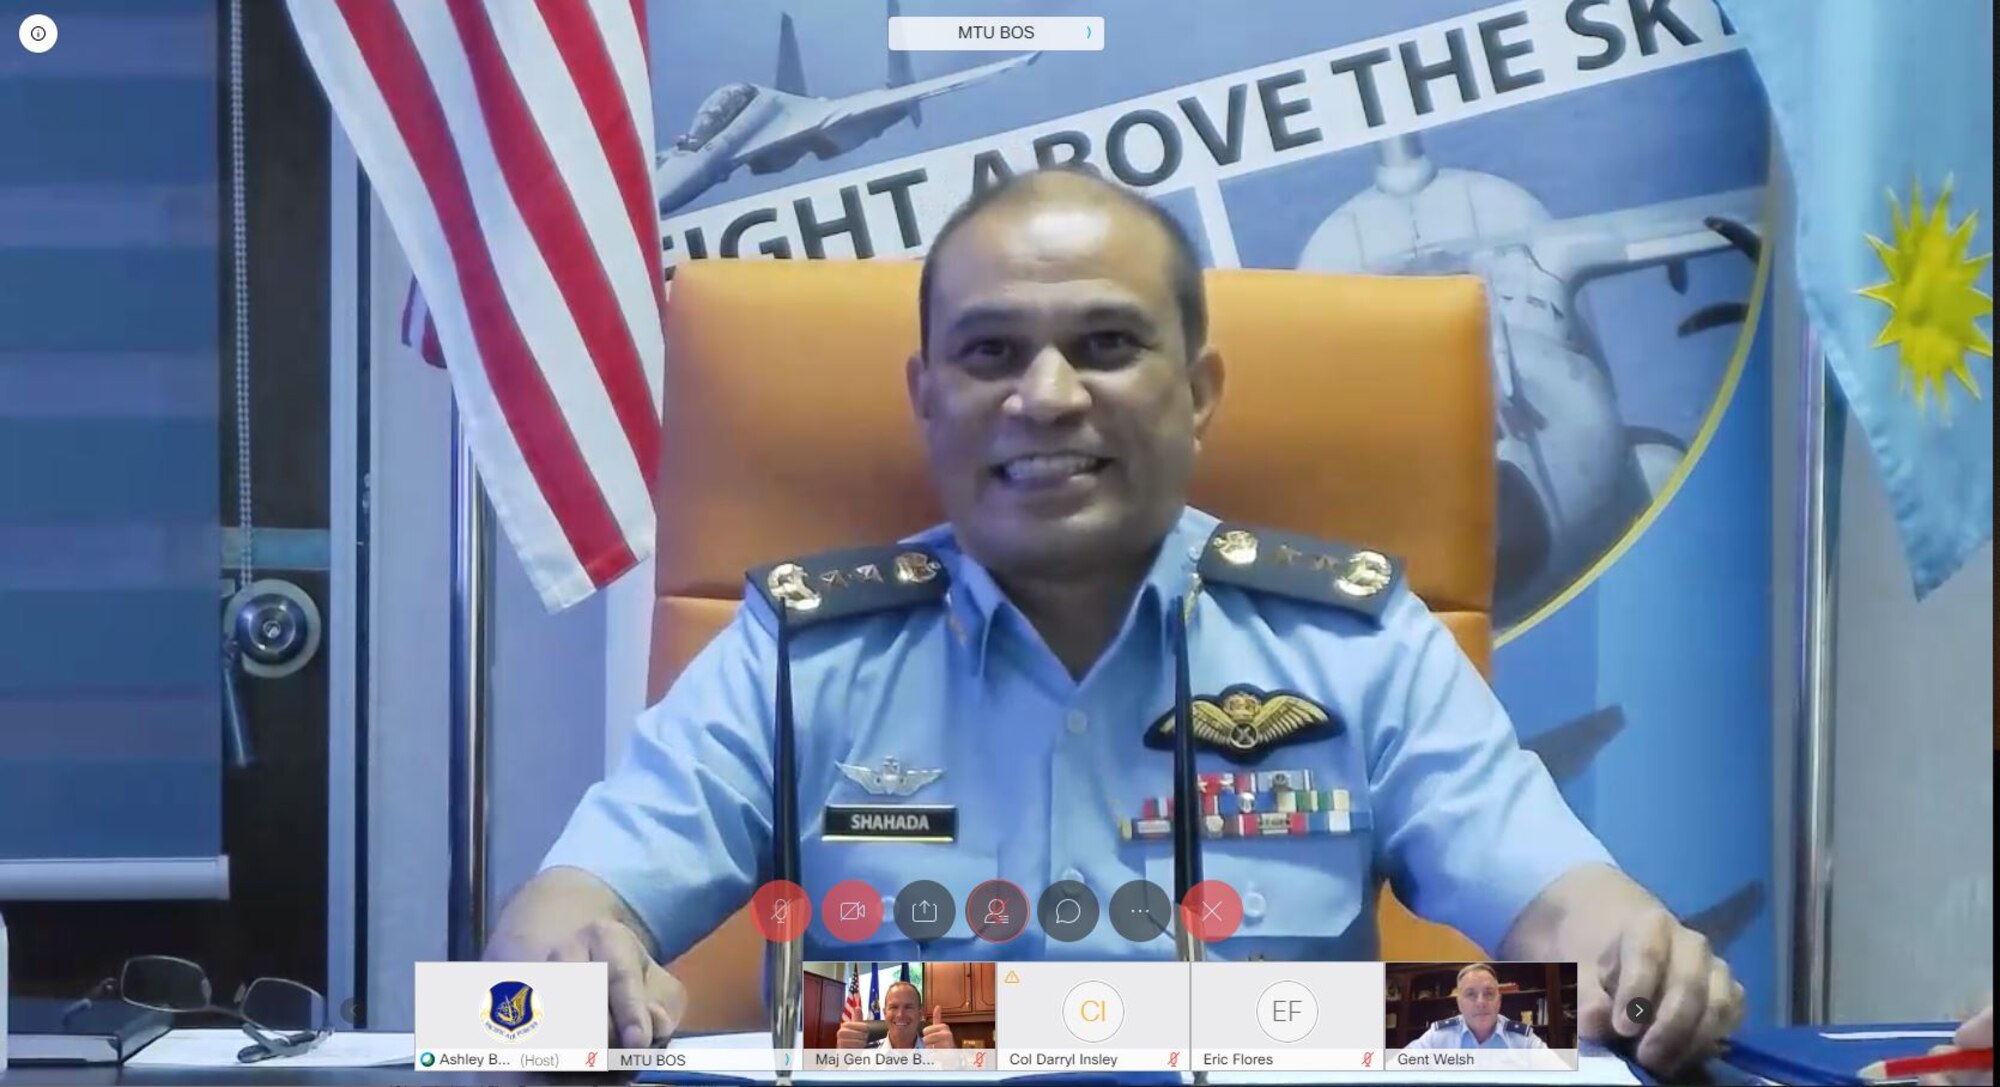 Royal Malaysian Air Force Maj. Gen. Mohd Shahada bin Ismail, Assistant Chief of Staff for Operation and Strategy Department at RMAF Headquarters, Kuala Lumpur (top middle) delivers his closing remarks during a virtual Airman-to-Airman Talks (A2AT) engagement September 14, 2020. The two air forces have participated in a number of engagements and exercises together since the early 1980s, the most recent being Exercise Cope Taufan 18 and the Langkawi International Maritime and Aerospace Exhibition 2019. (U.S. Air Force photo by Staff Sgt. Hailey Haux)